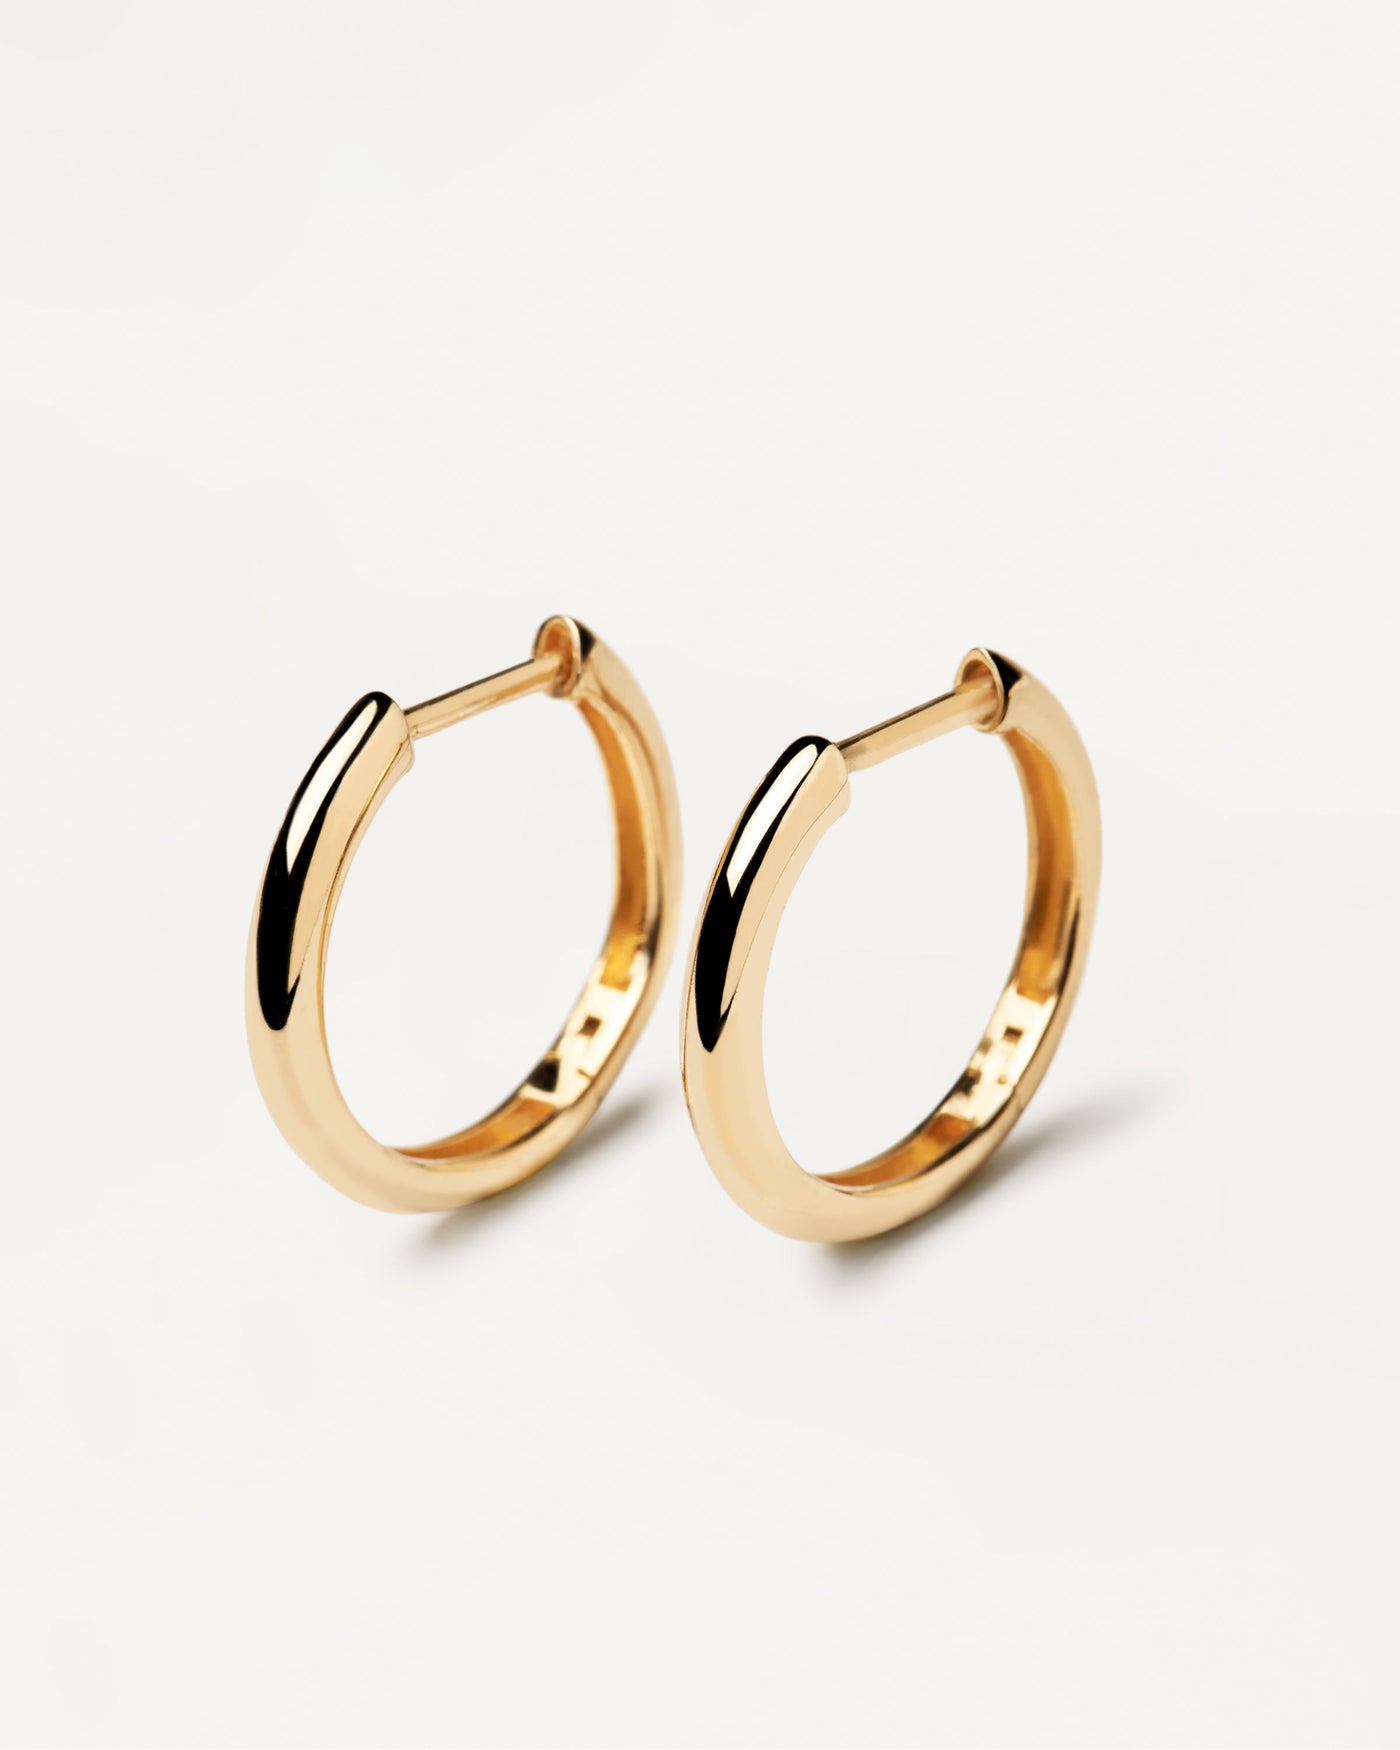 2023 Selection | Gold Bold Medium Hoops. Plain solid yellow gold hoops made of recycled gold. Get the latest arrival from PDPAOLA. Place your order safely and get this Best Seller. Free Shipping.